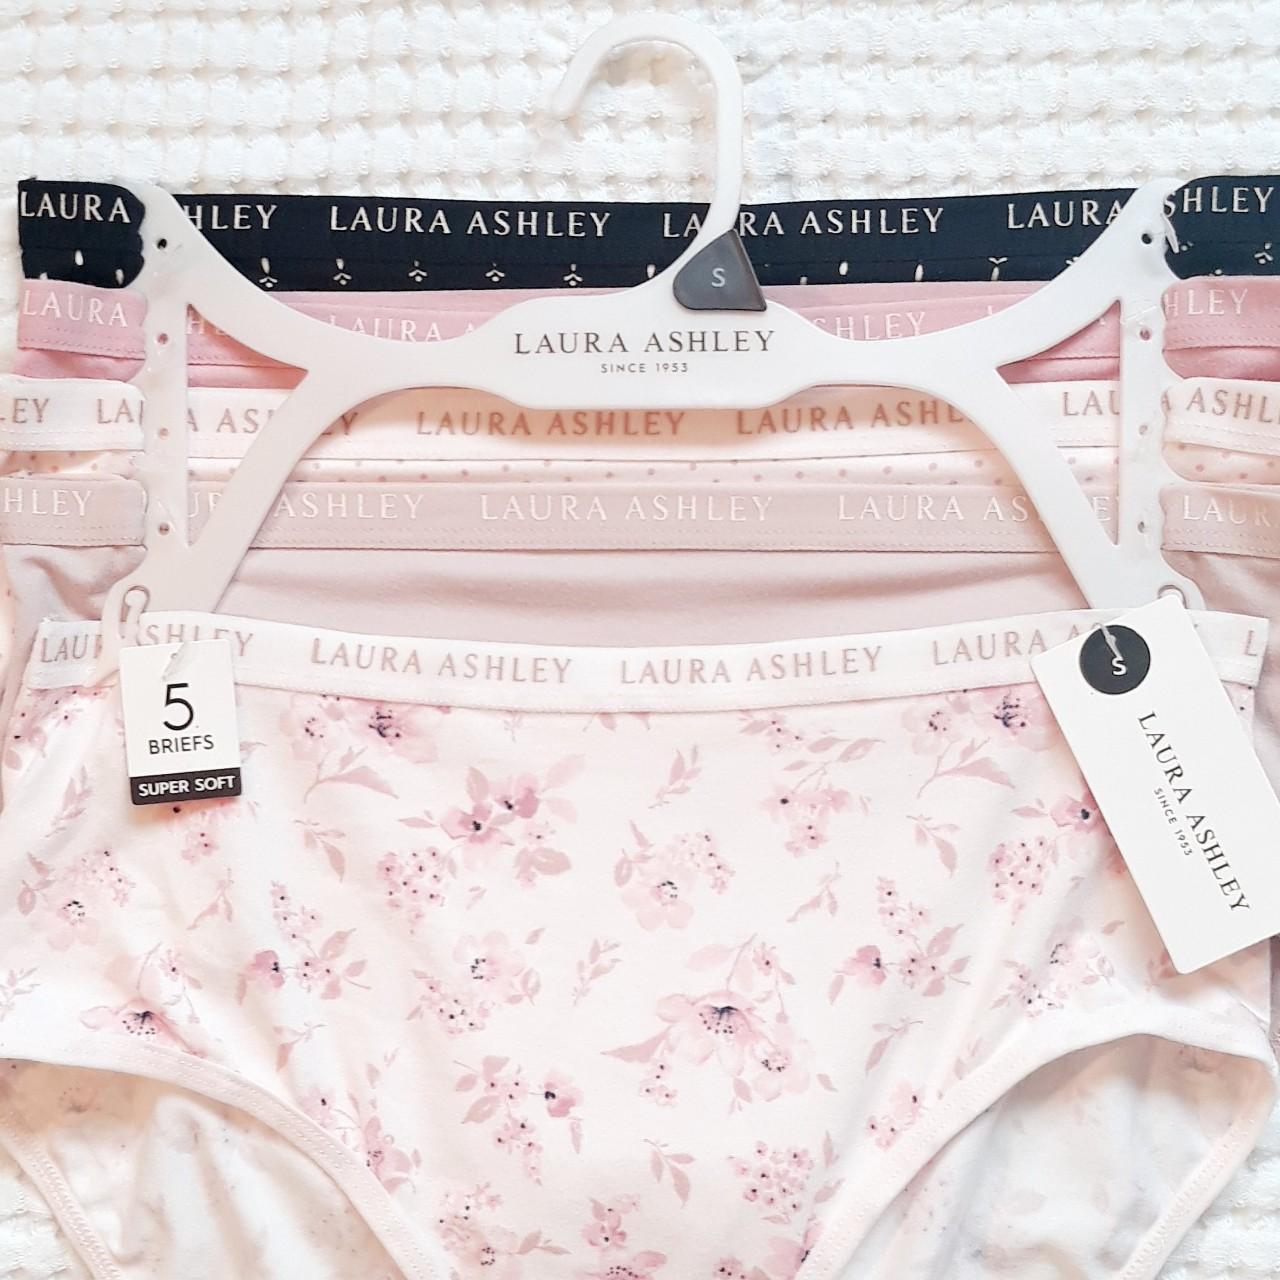 🌸NWT Lace detail 5-Pack Laura Ashley Underwear